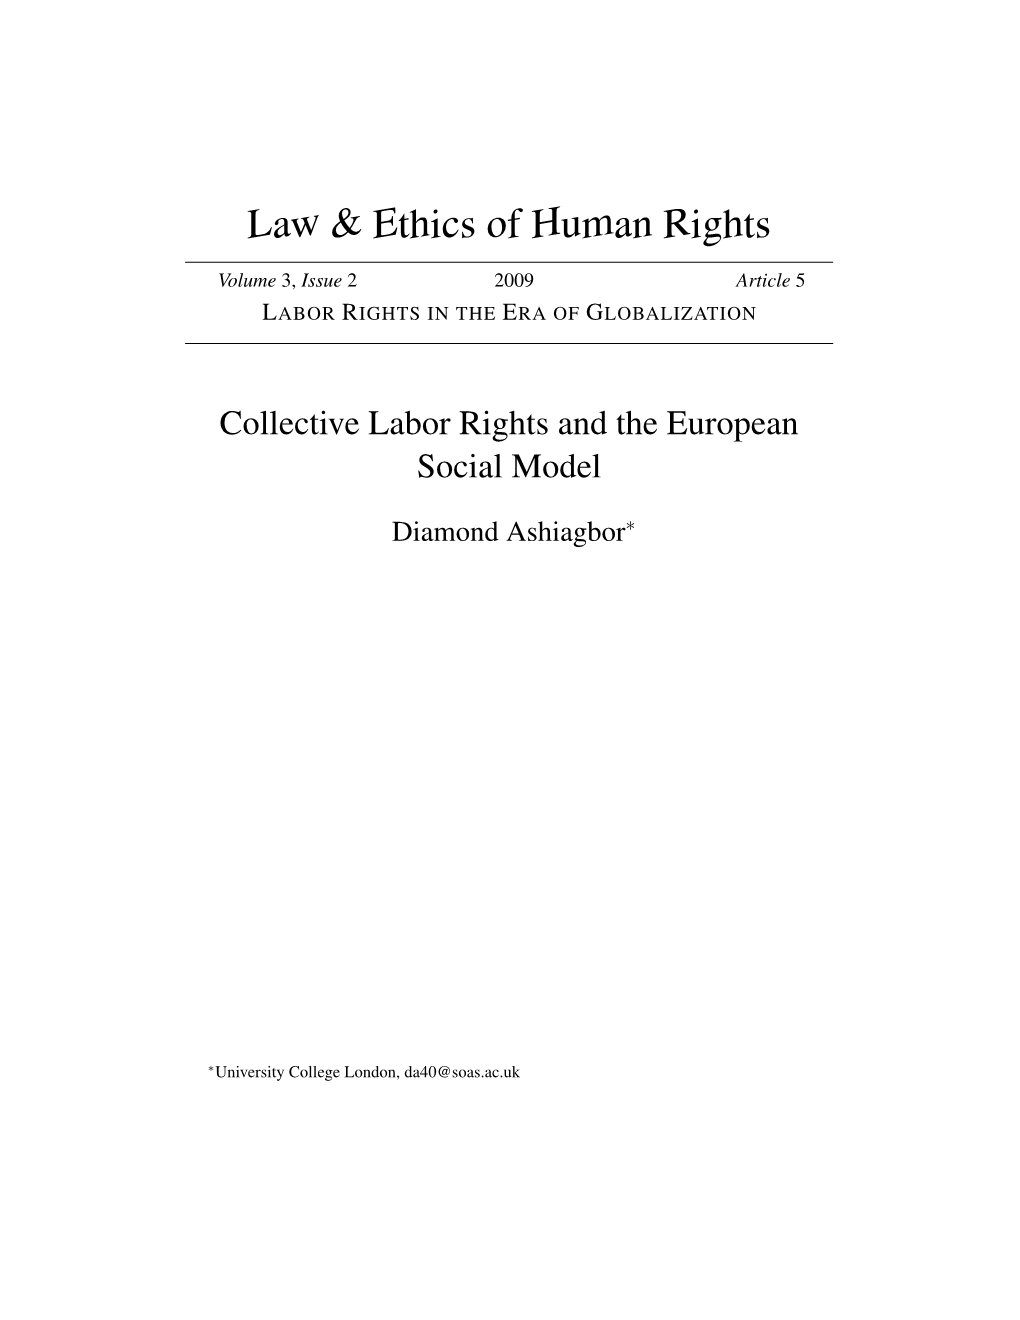 Collective Labor Rights and the European Social Model